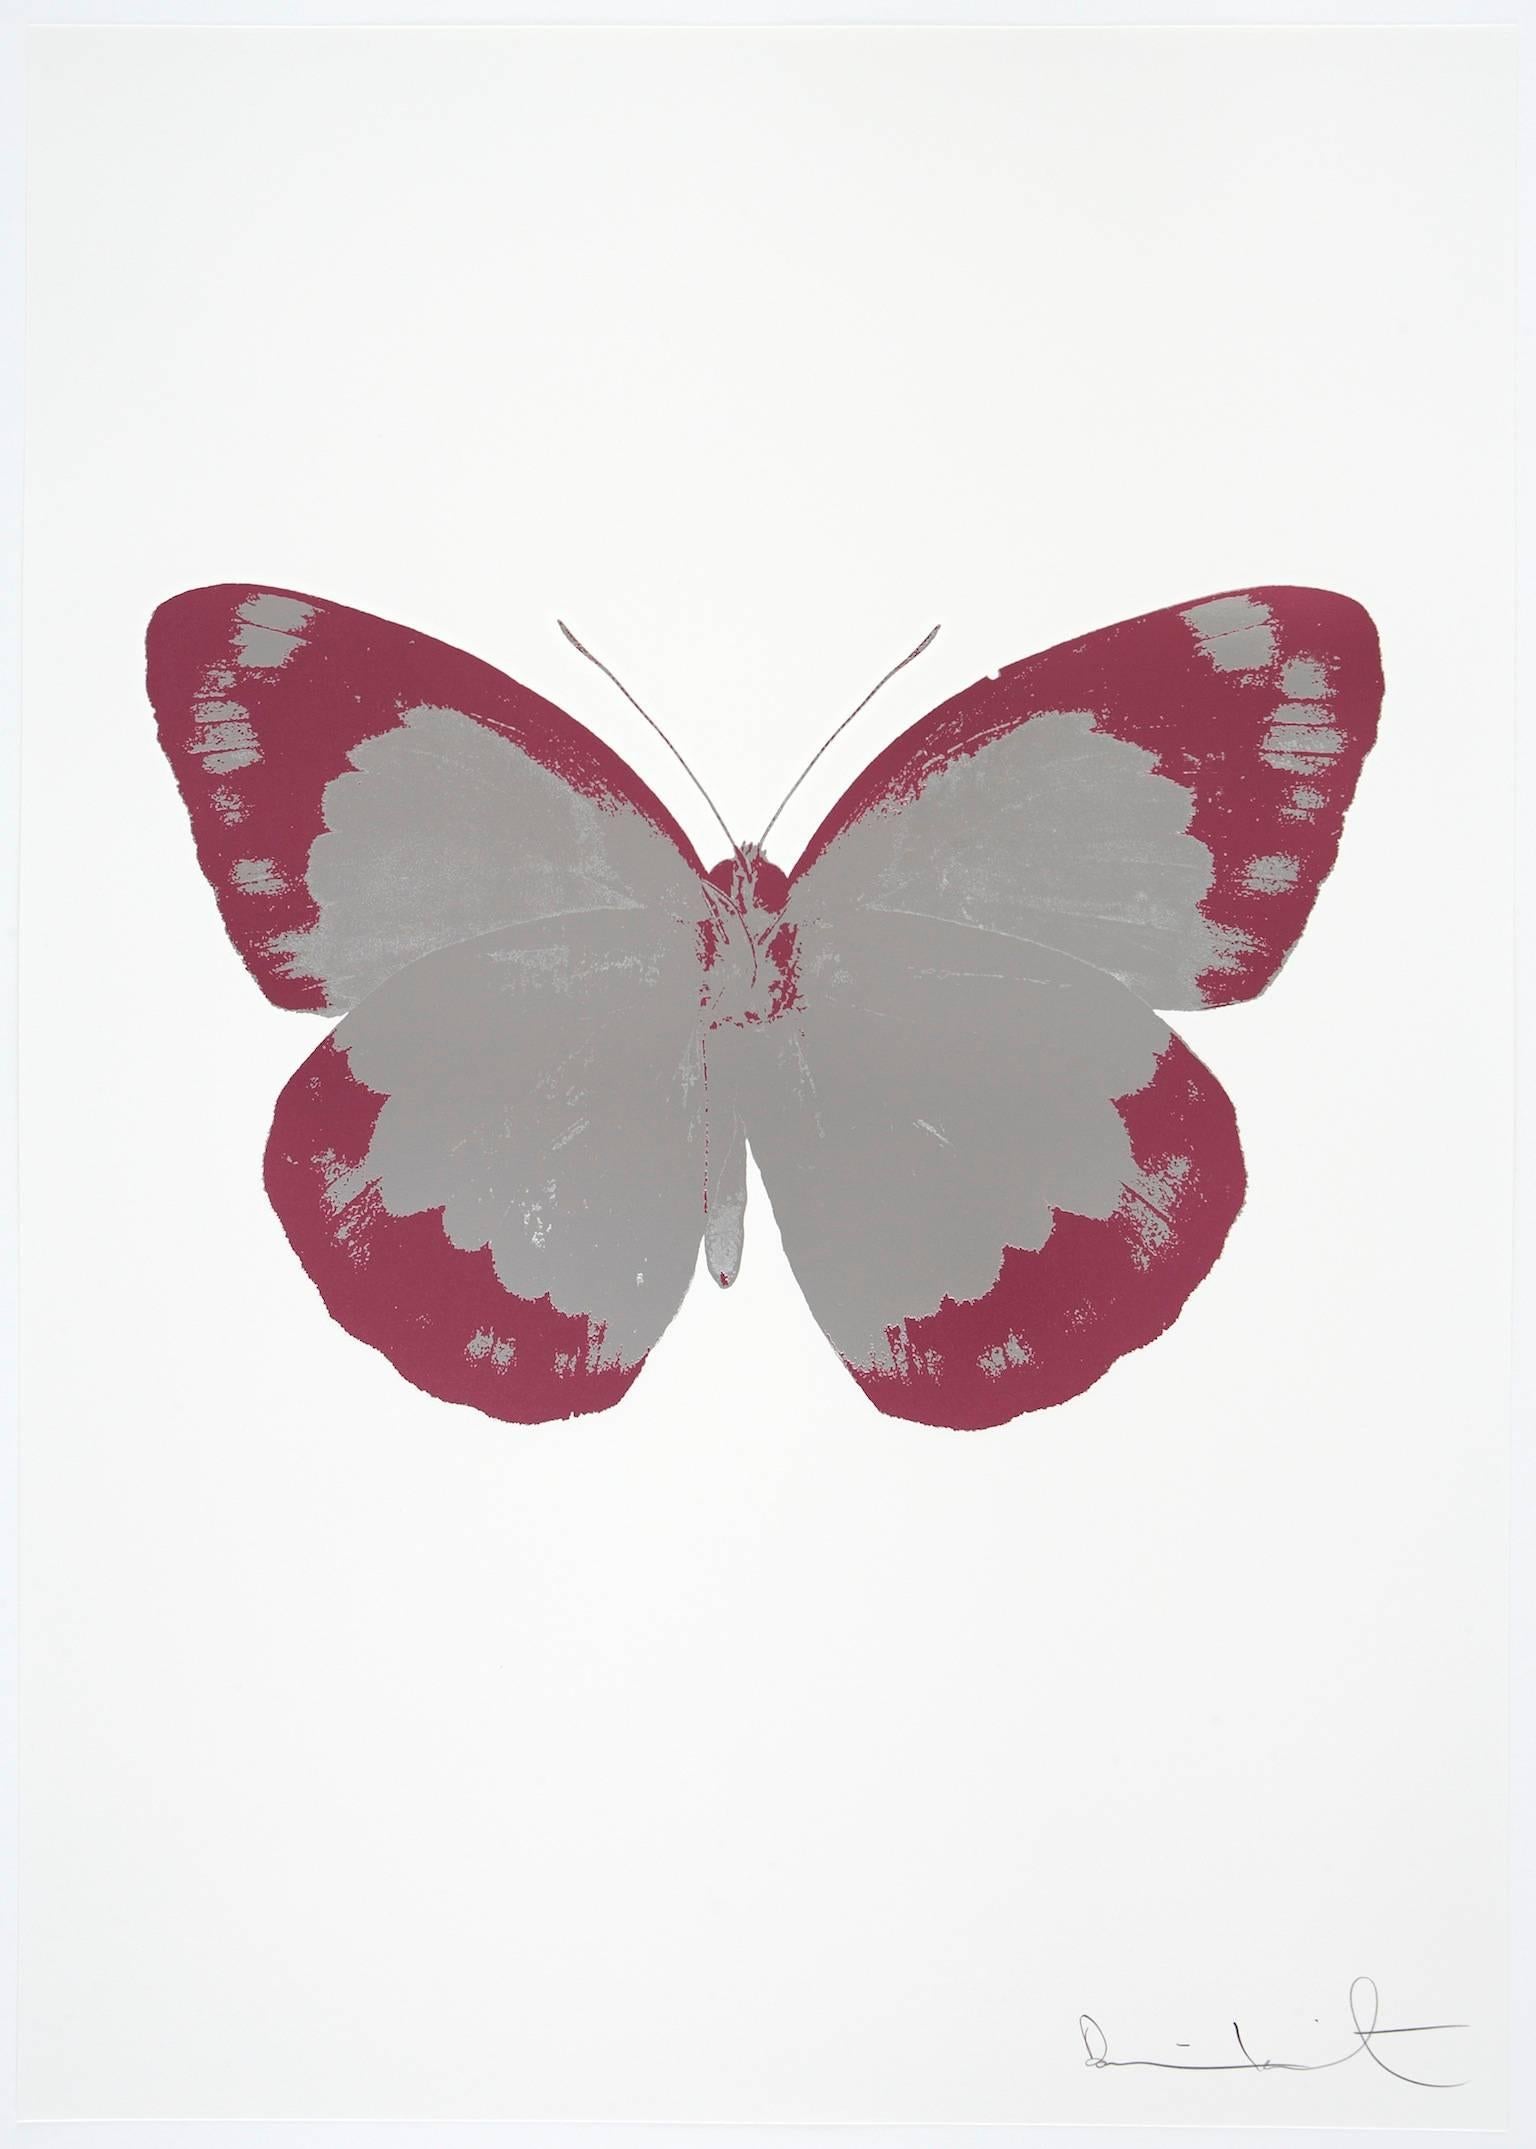 The Souls II - Silver Gloss - Loganberry Pink - Print by Damien Hirst